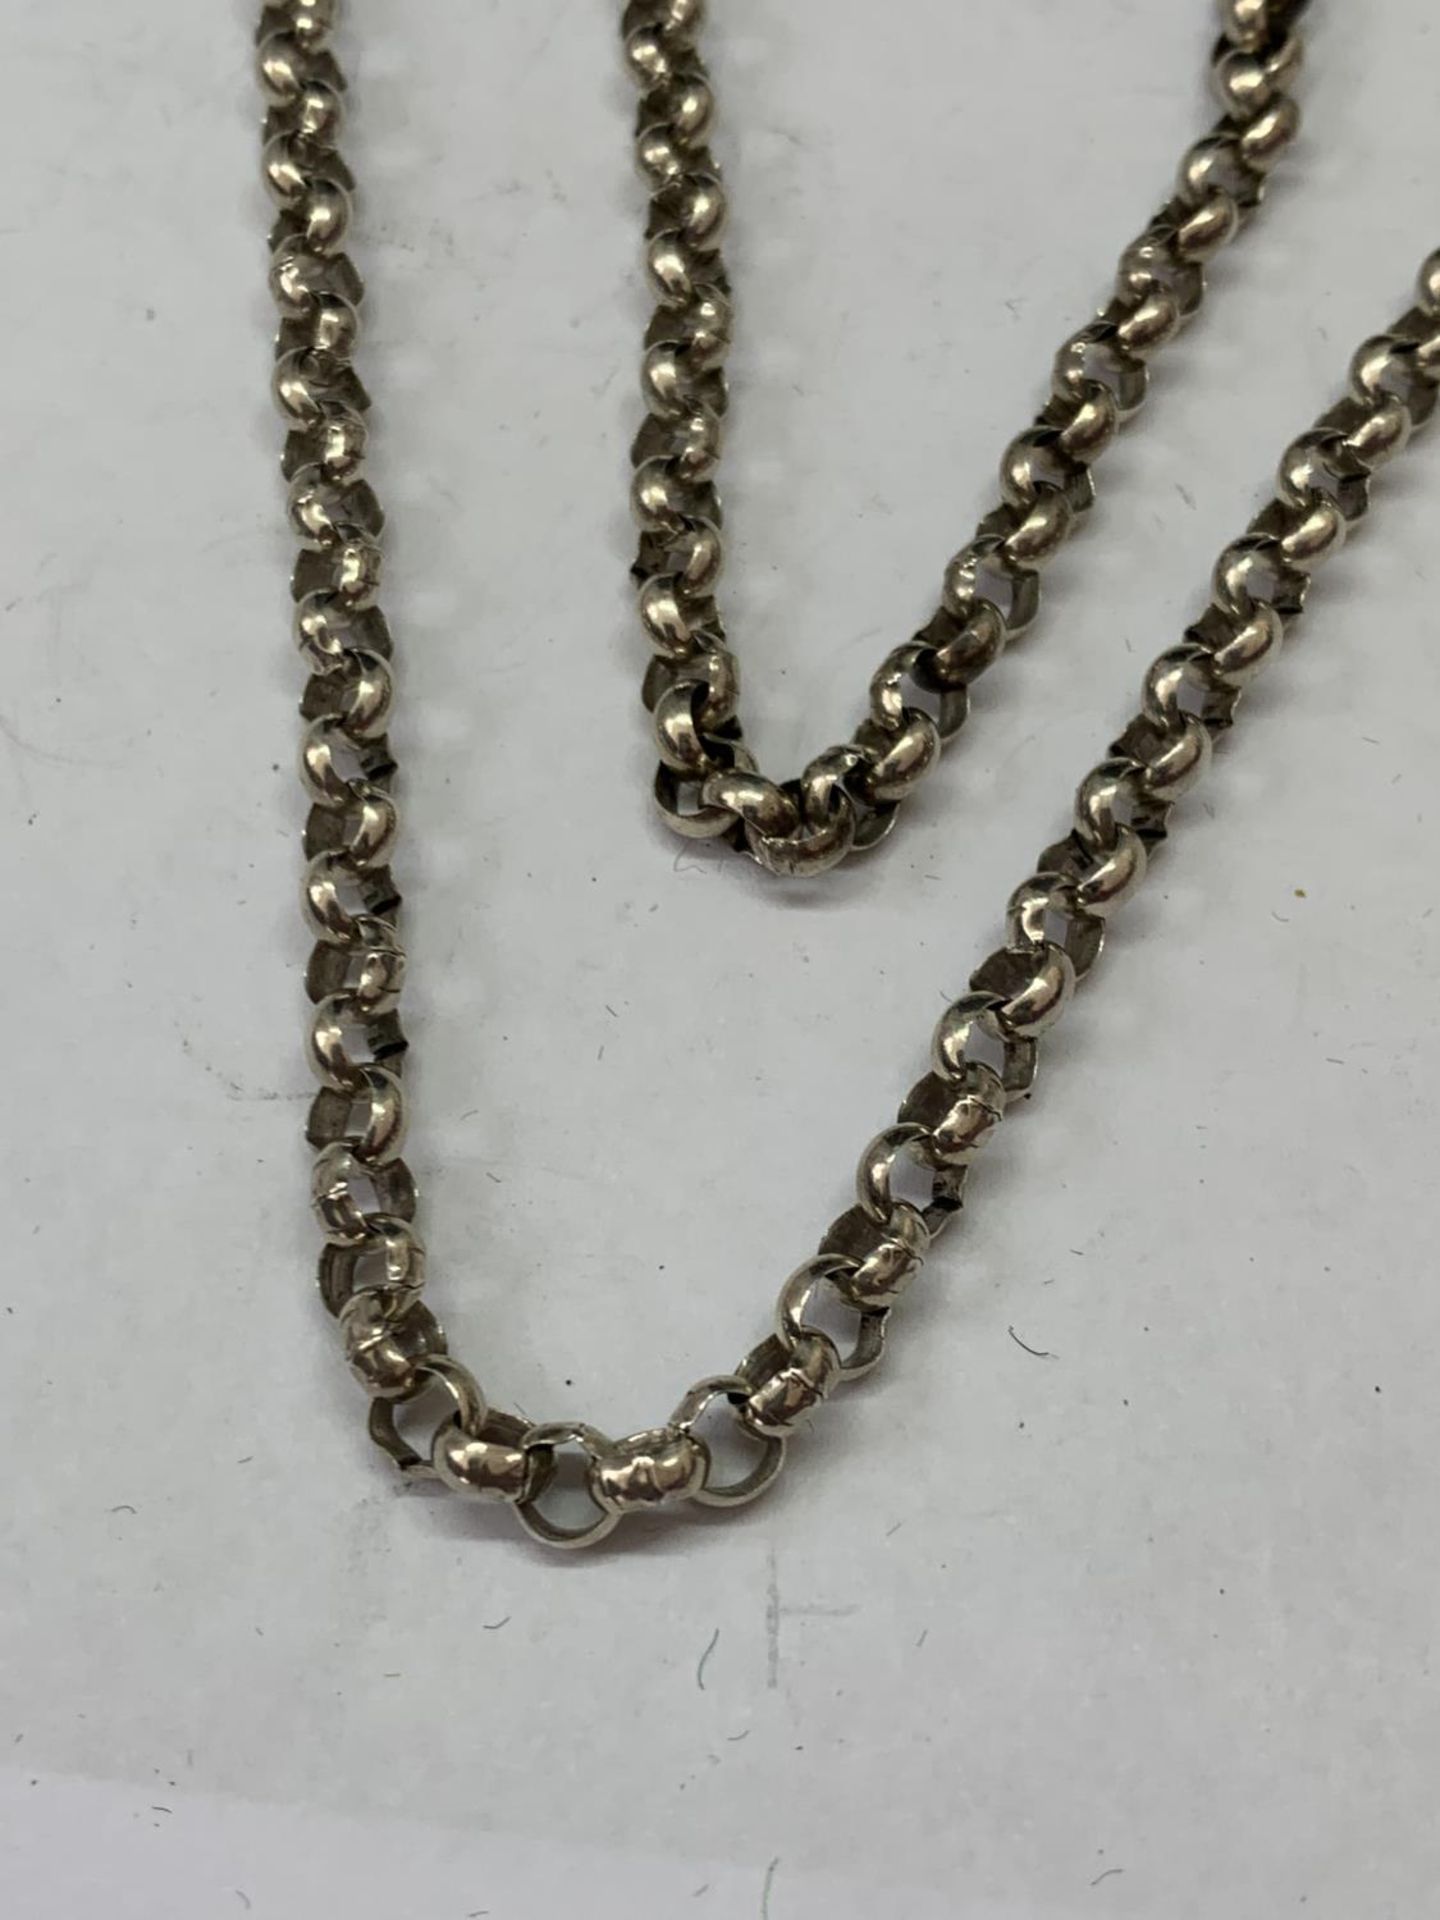 A SILVER BELCHER CHAIN NECKLACE LENGTH 28" - Image 2 of 3